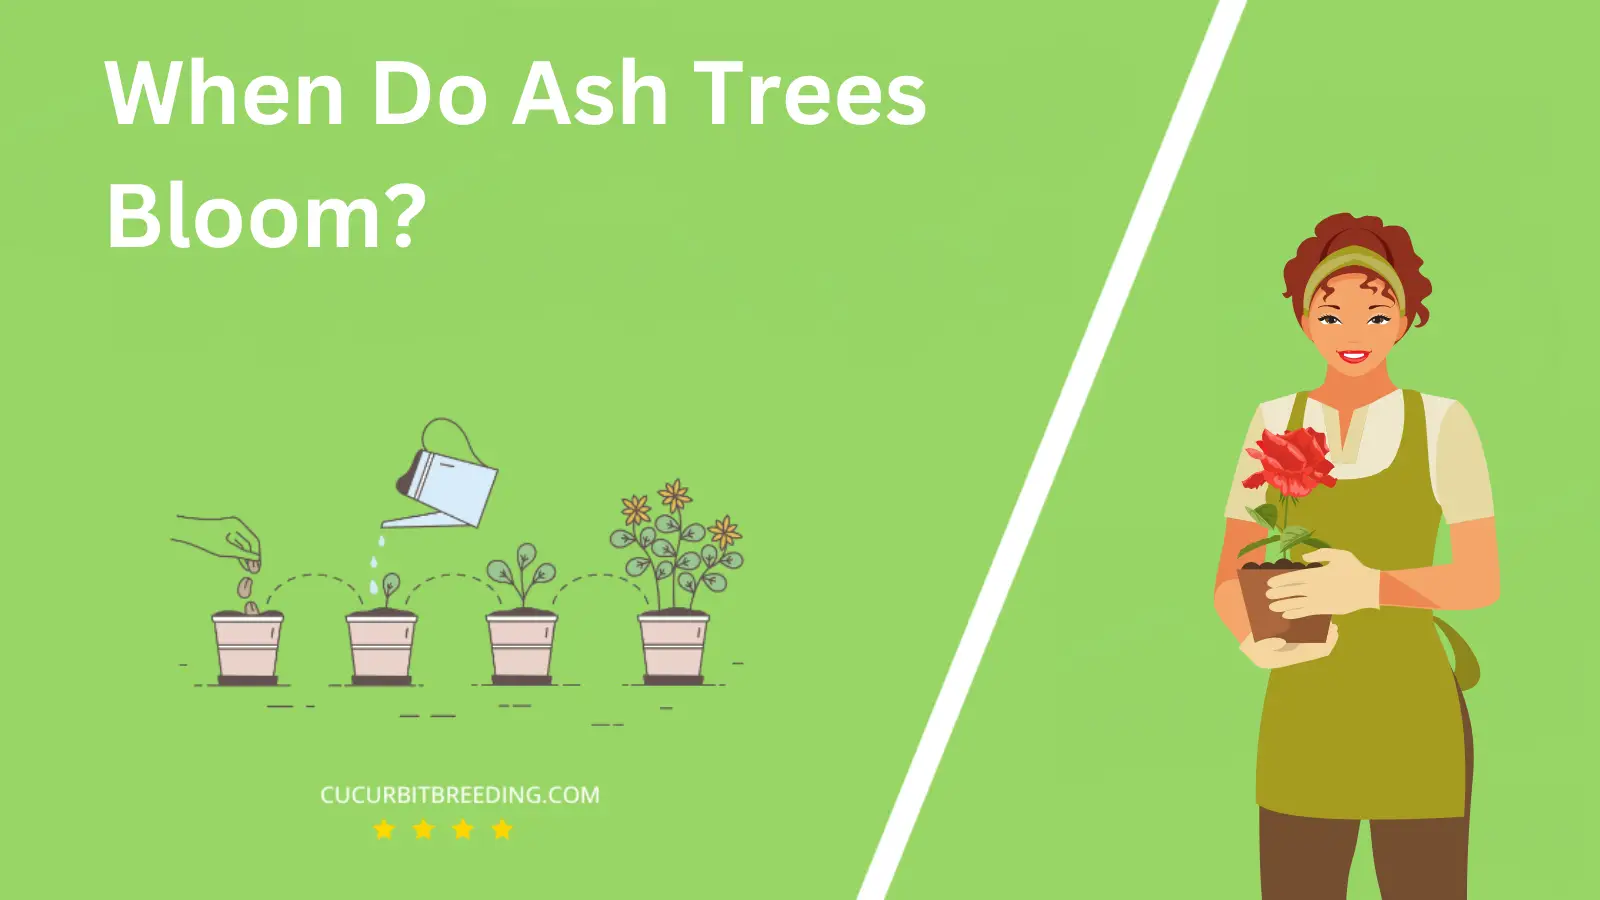 When Do Ash Trees Bloom?